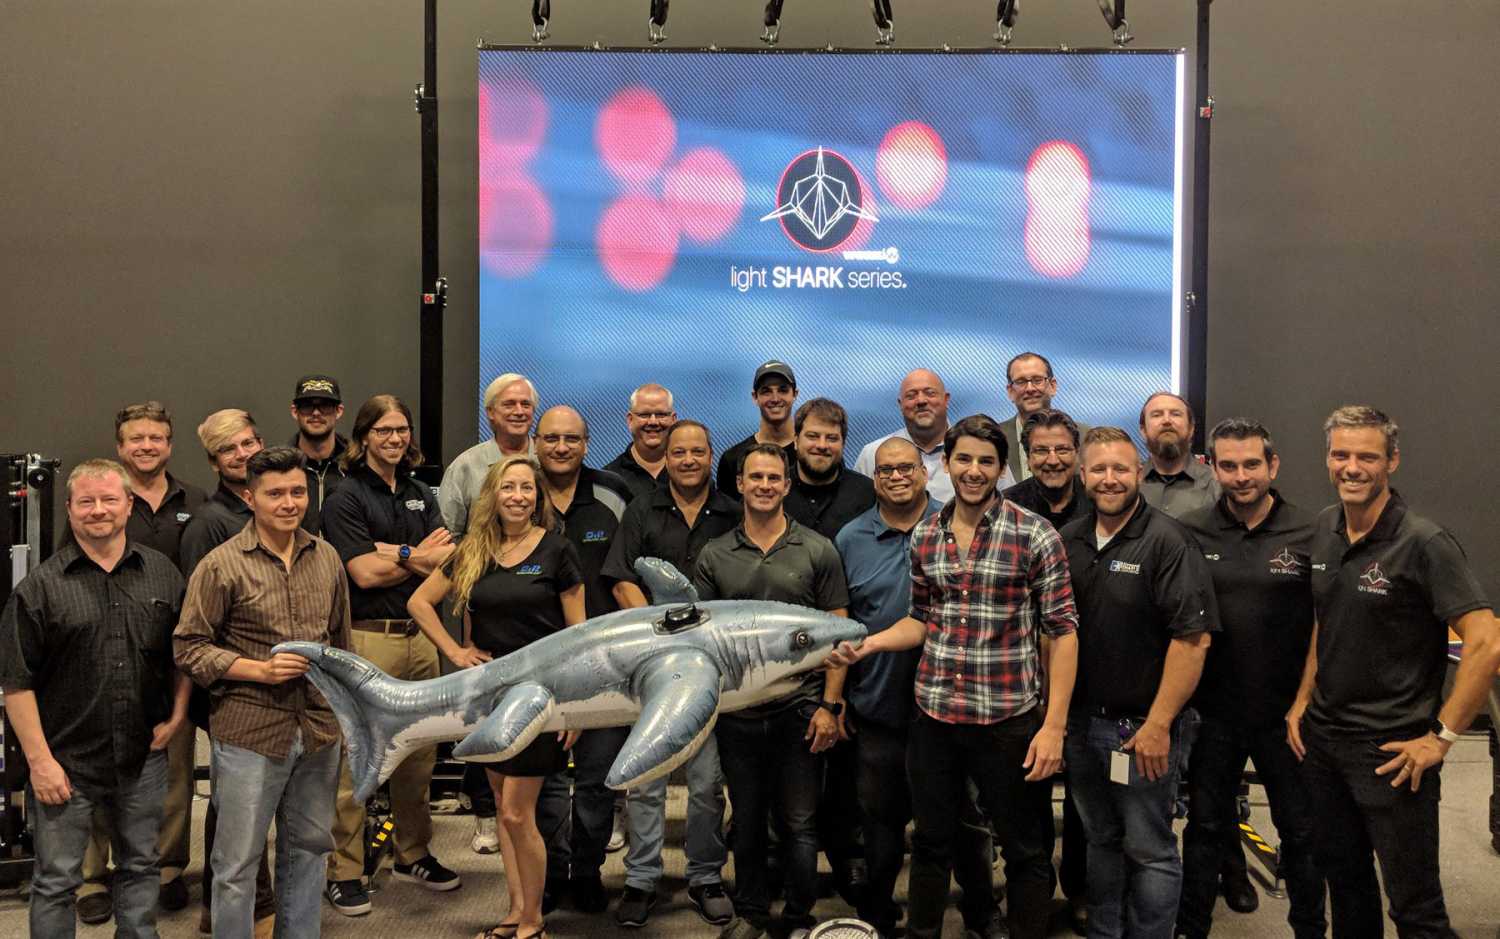 CSO Juan Jose Vila and Lightshark product manager Alejo Cervera of WORK PRO with Joel Henry and the rest of the Blizzard sales team